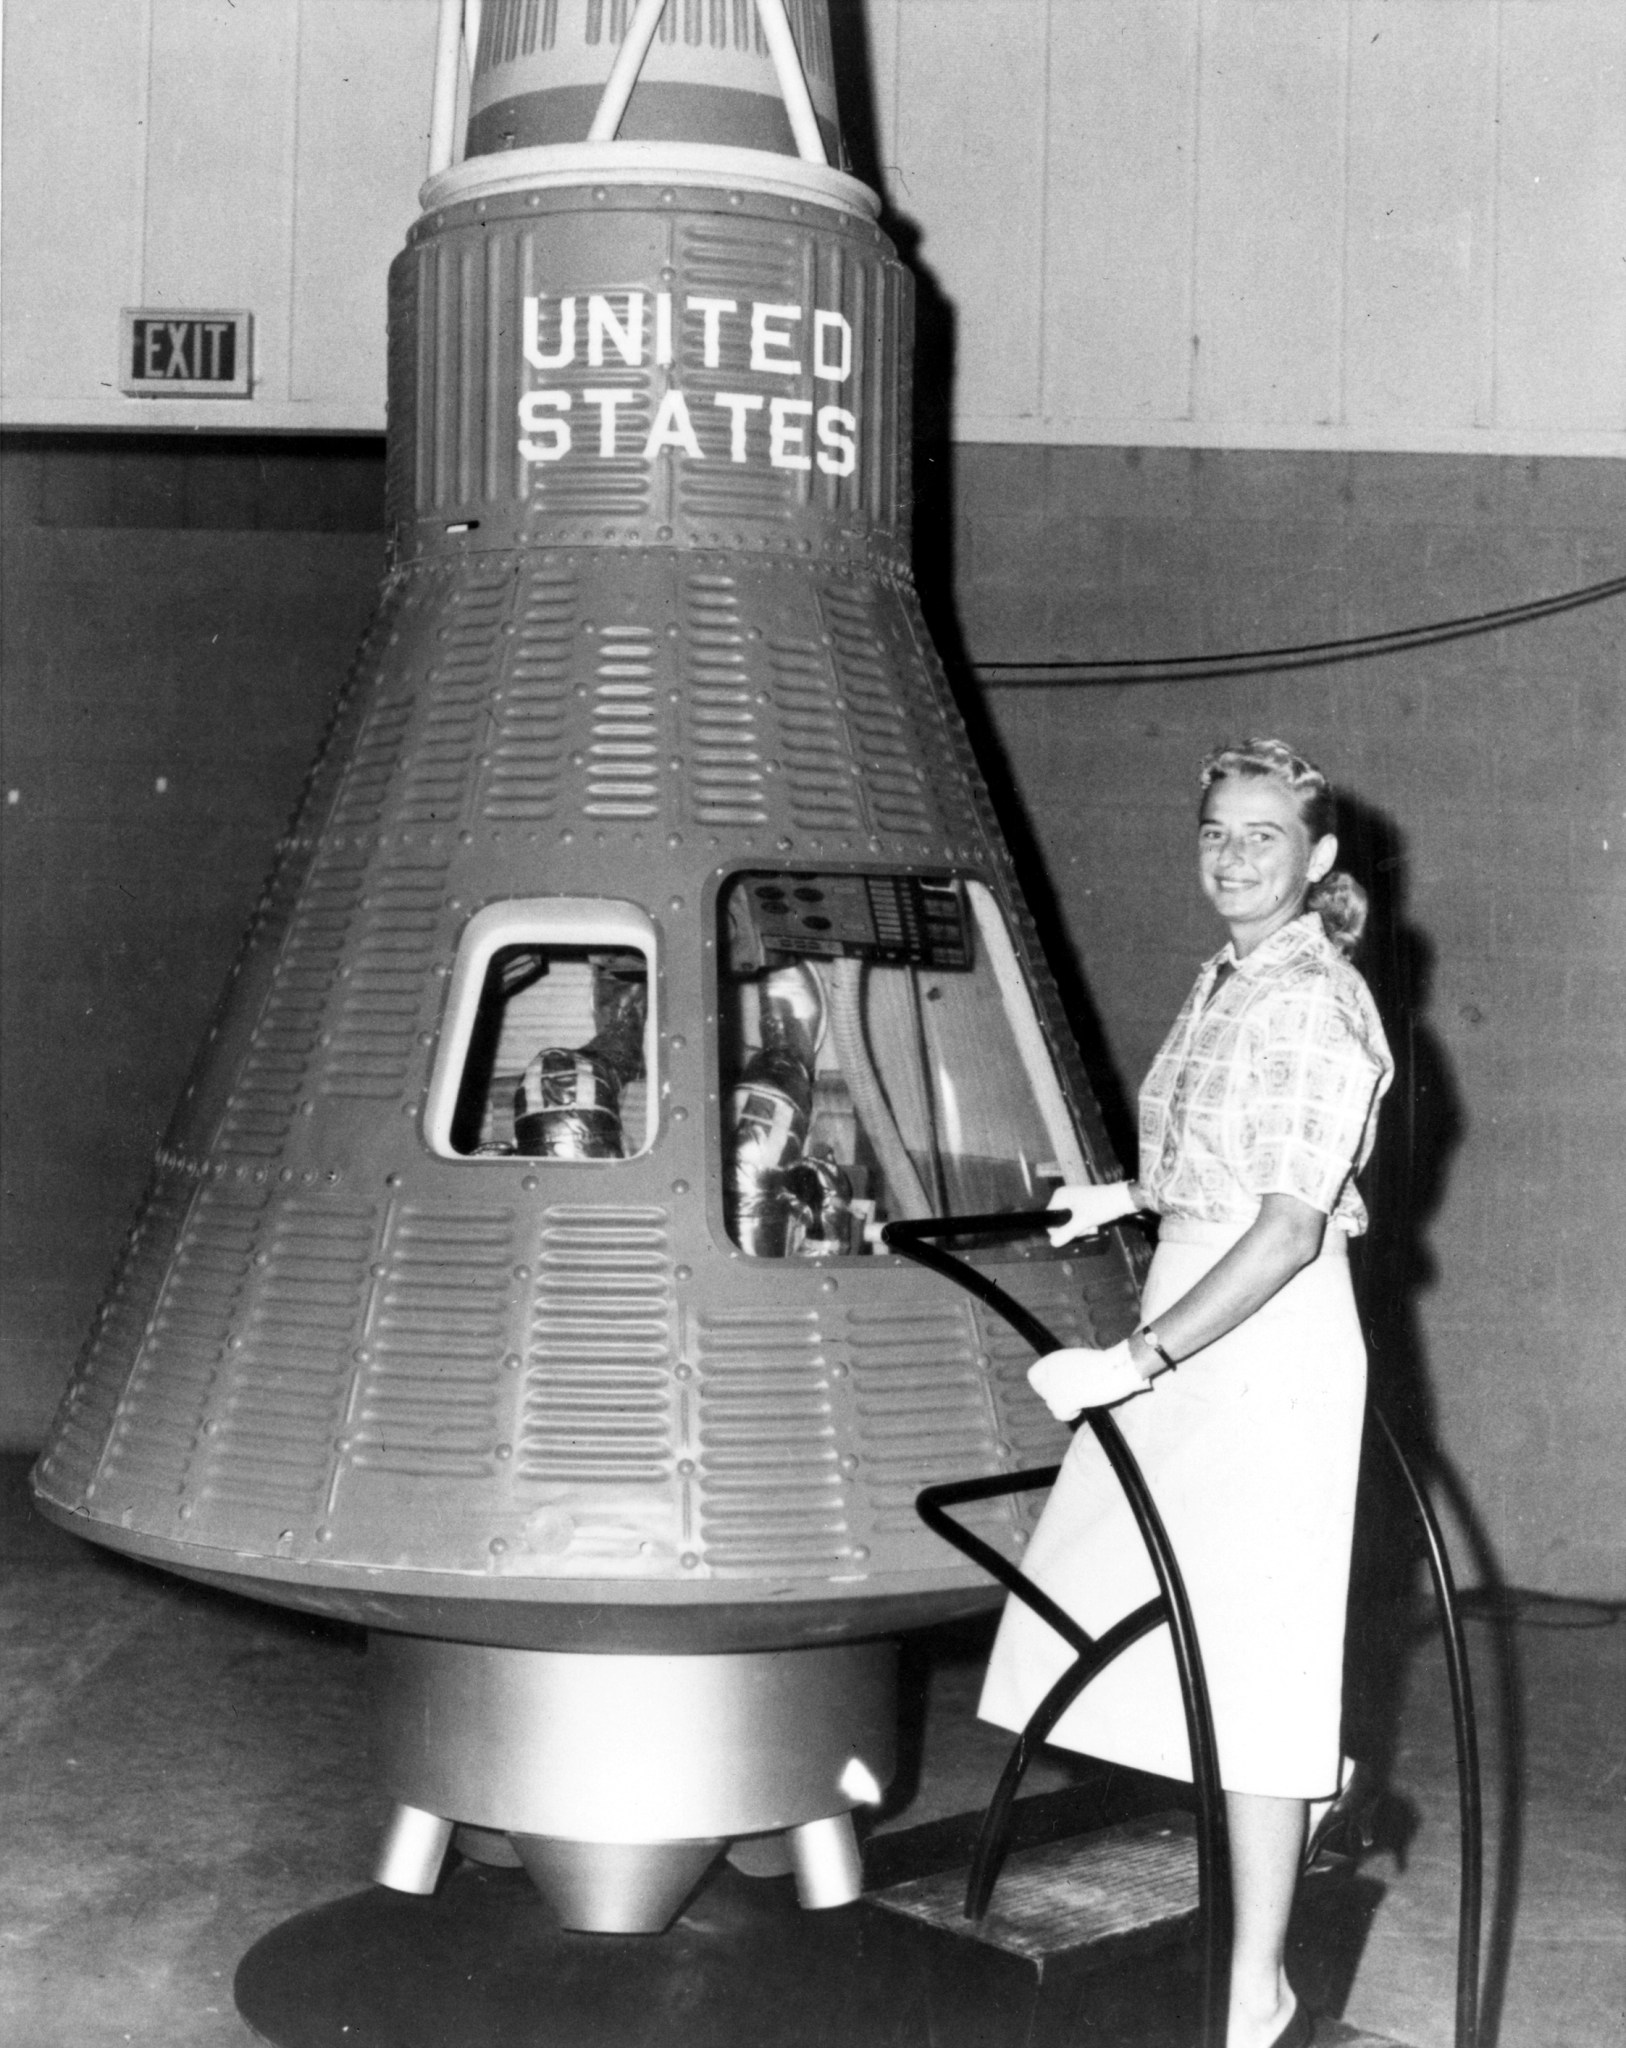 Female standing next to space capsule.